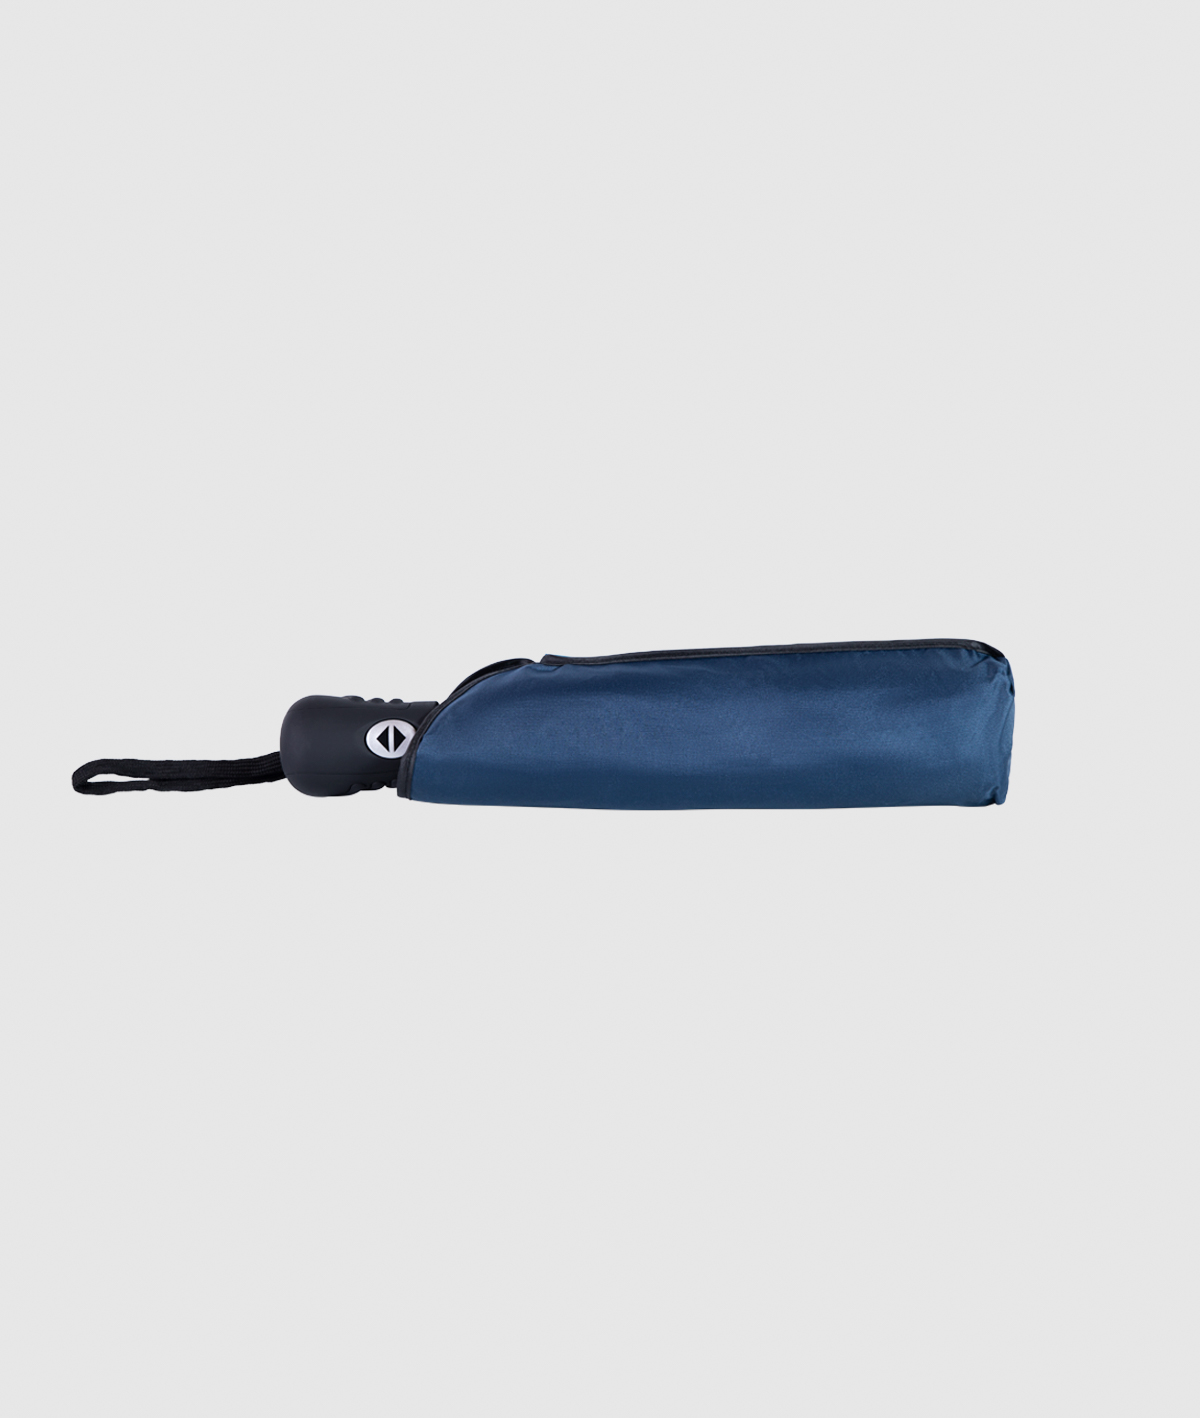 IE Compact Travel Umbrella. Navy color front